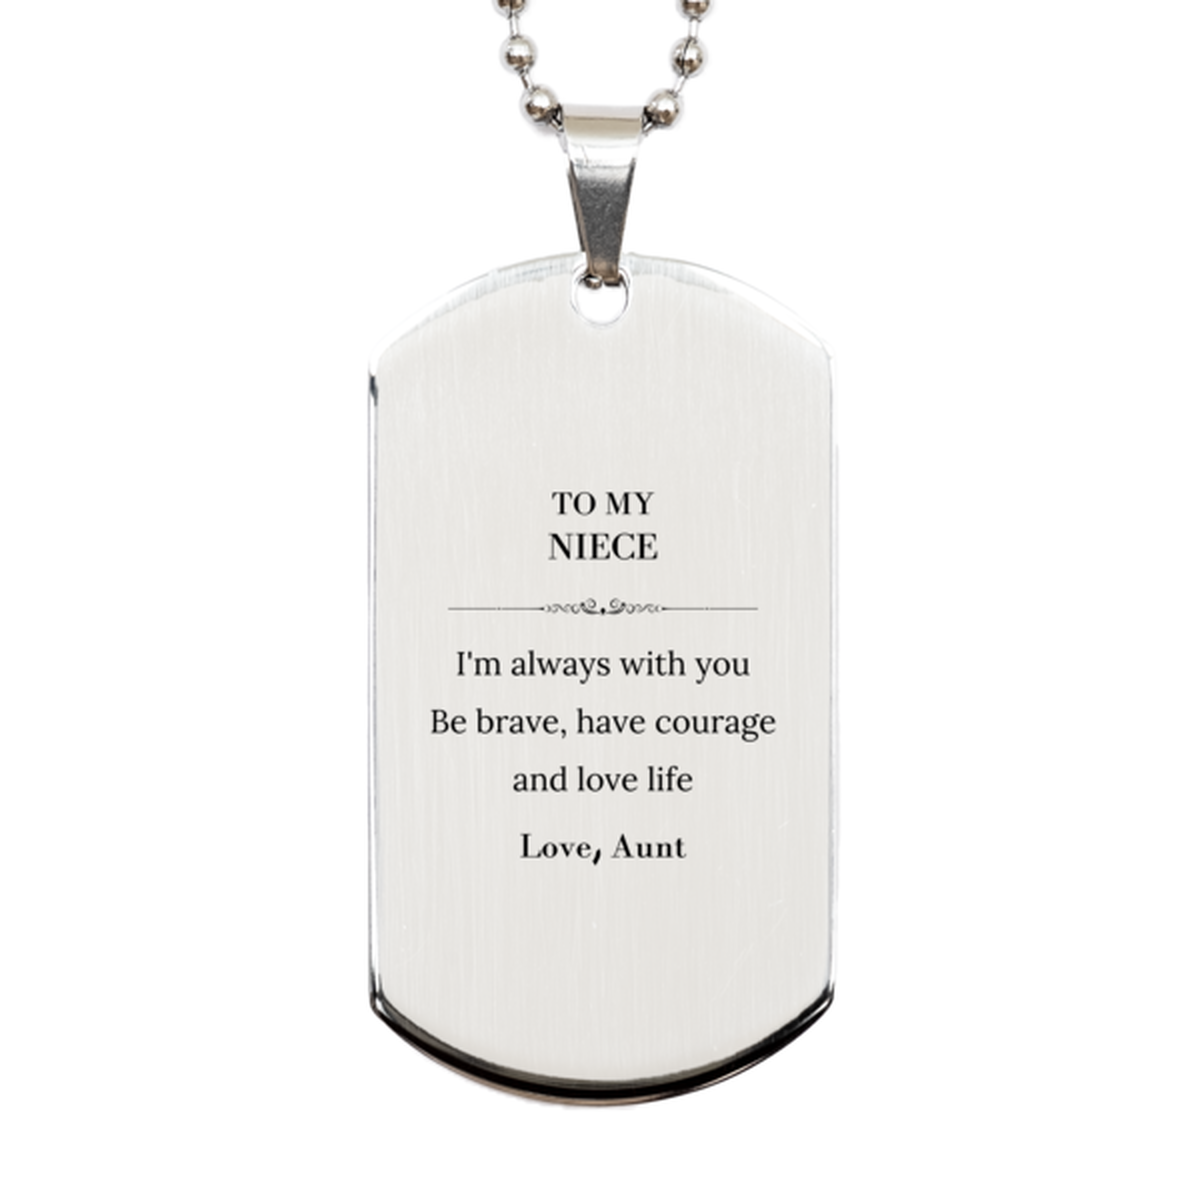 To My Niece Gifts from Aunt, Unique Silver Dog Tag Inspirational Christmas Birthday Graduation Gifts for Niece I'm always with you. Be brave, have courage and love life. Love, Aunt